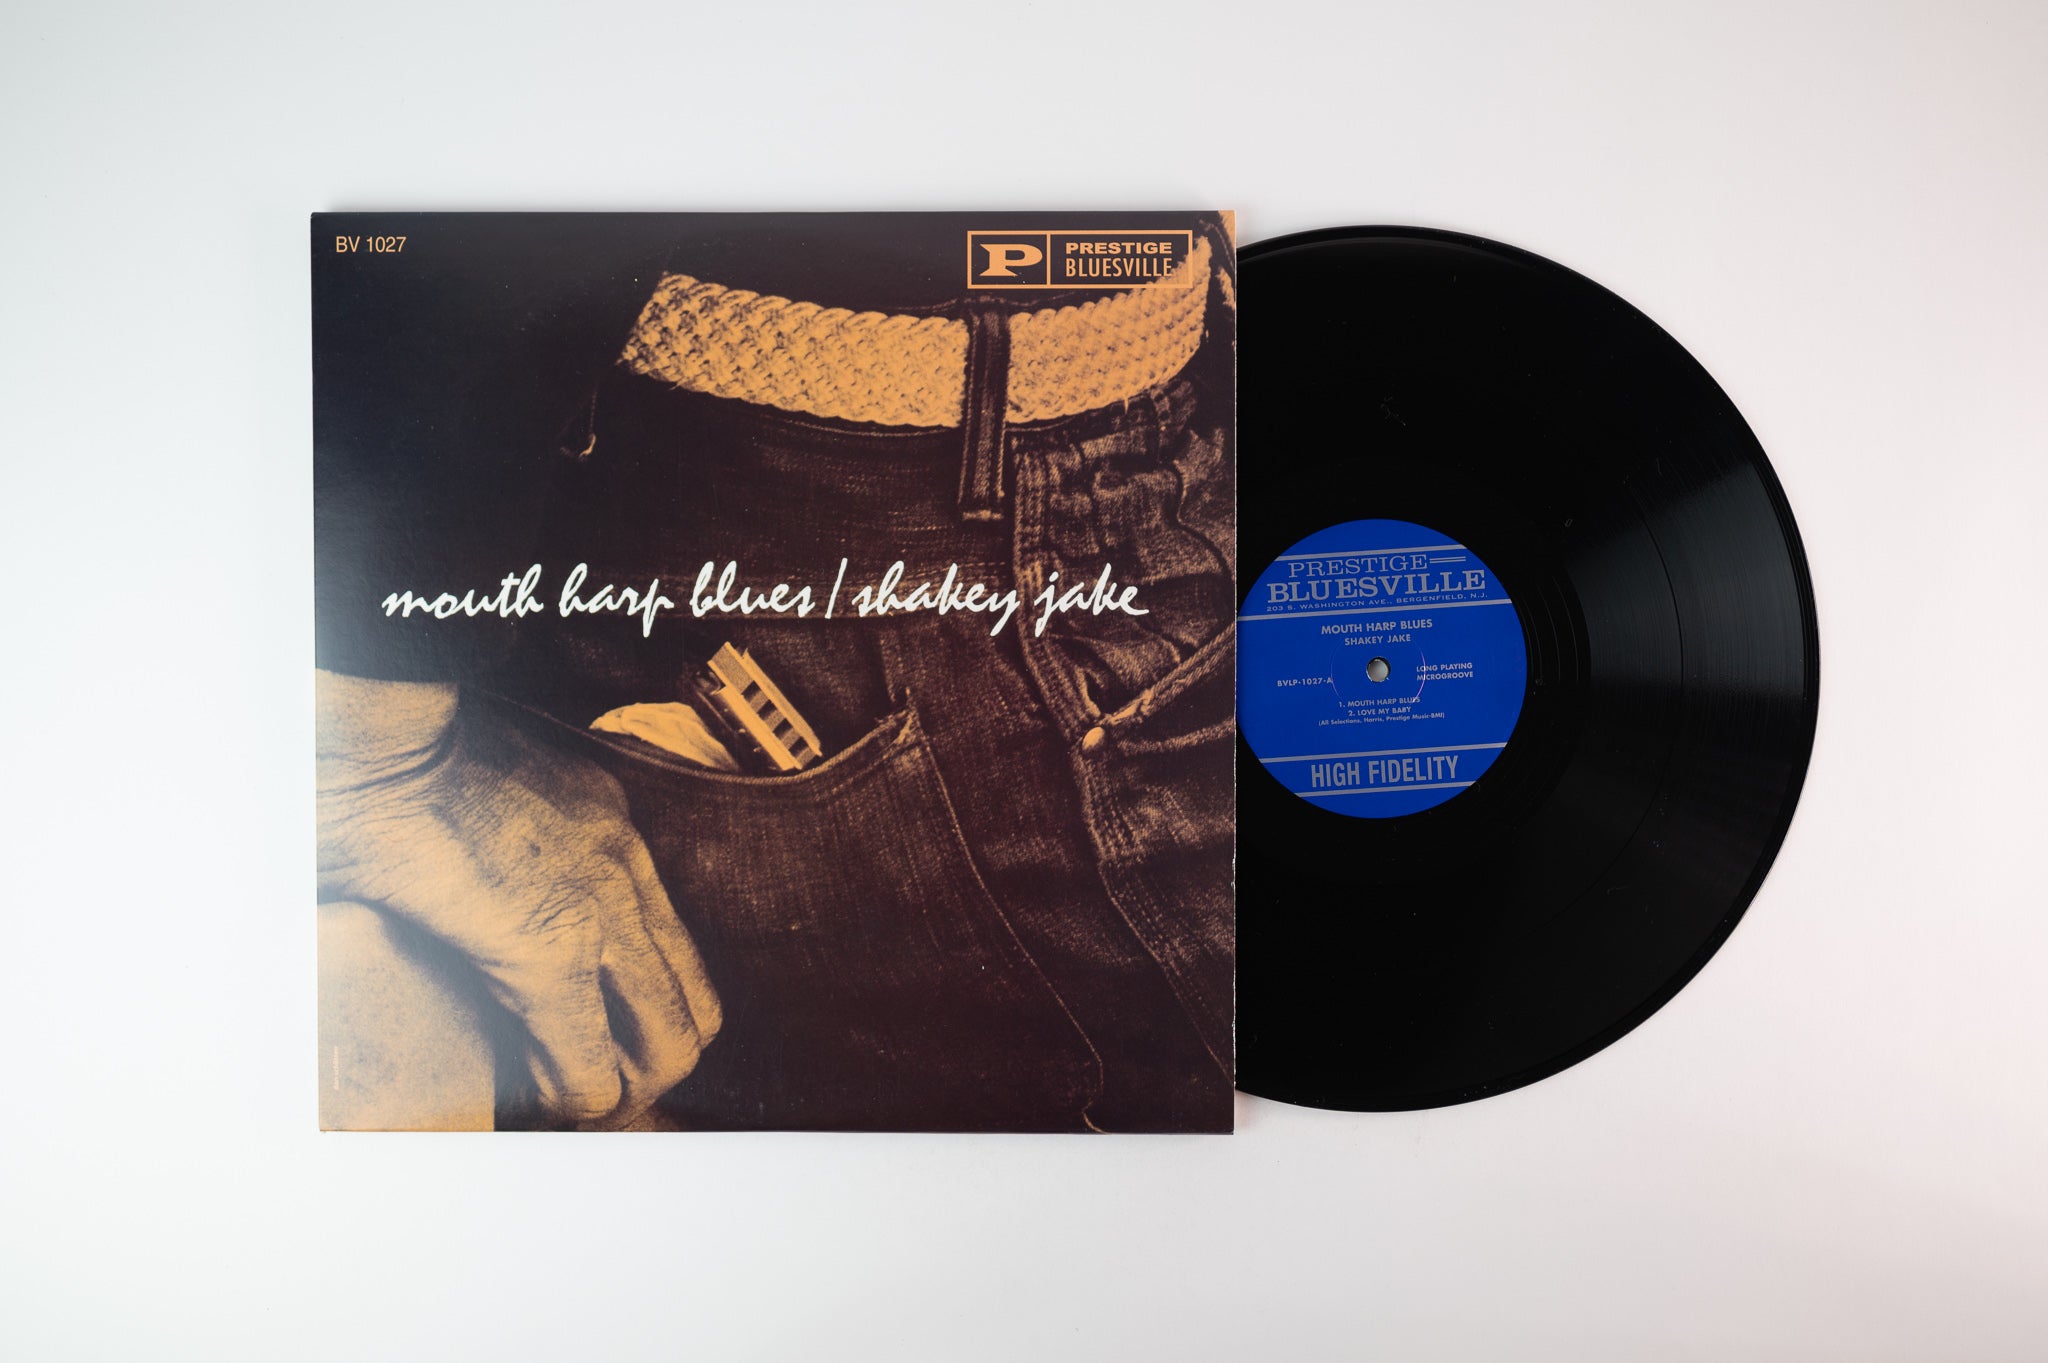 Shakey Jake - Mouth Harp Blues Analogue Productions 180 Gram 45 RPM Reissue